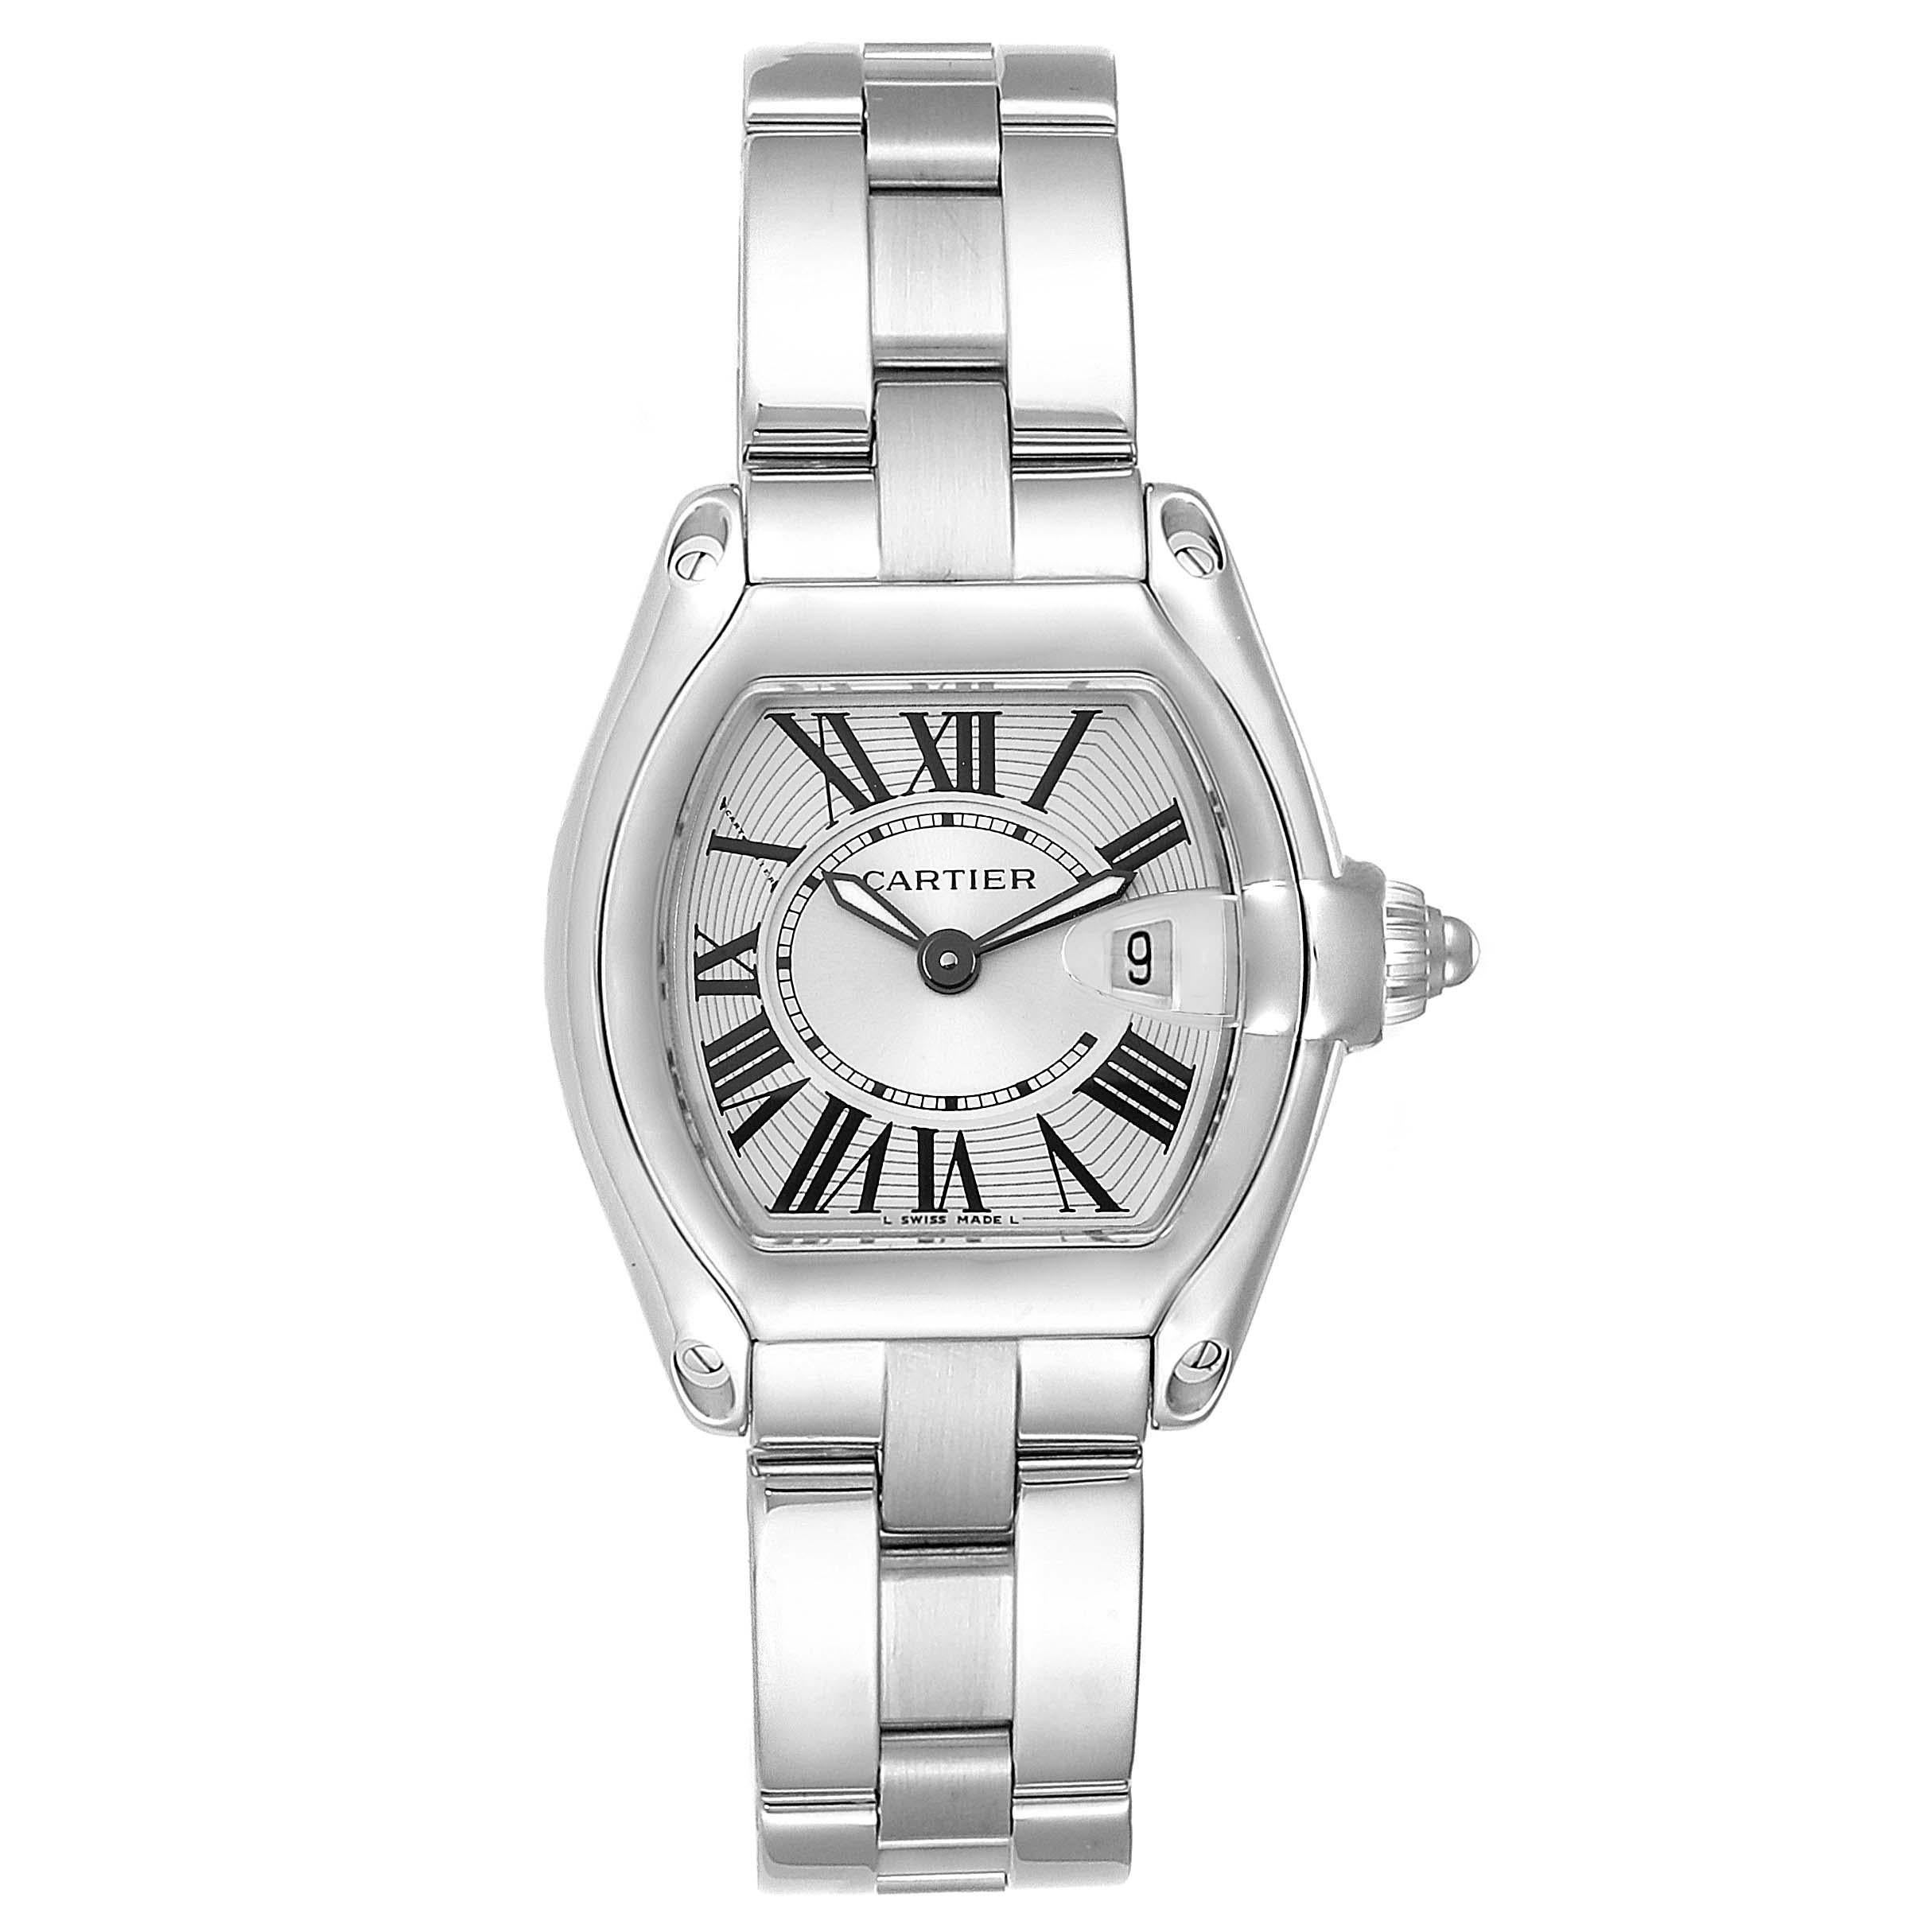 Cartier Roadster Silver Dial Small Model Steel Ladies Watch W62016V3 Box. Swiss quartz movement calibre 688. Stainless steel tonneau shaped case 36 x 30 mm. . Scratch resistant sapphire crystal with cyclops magnifying glass. Silver sunray effect